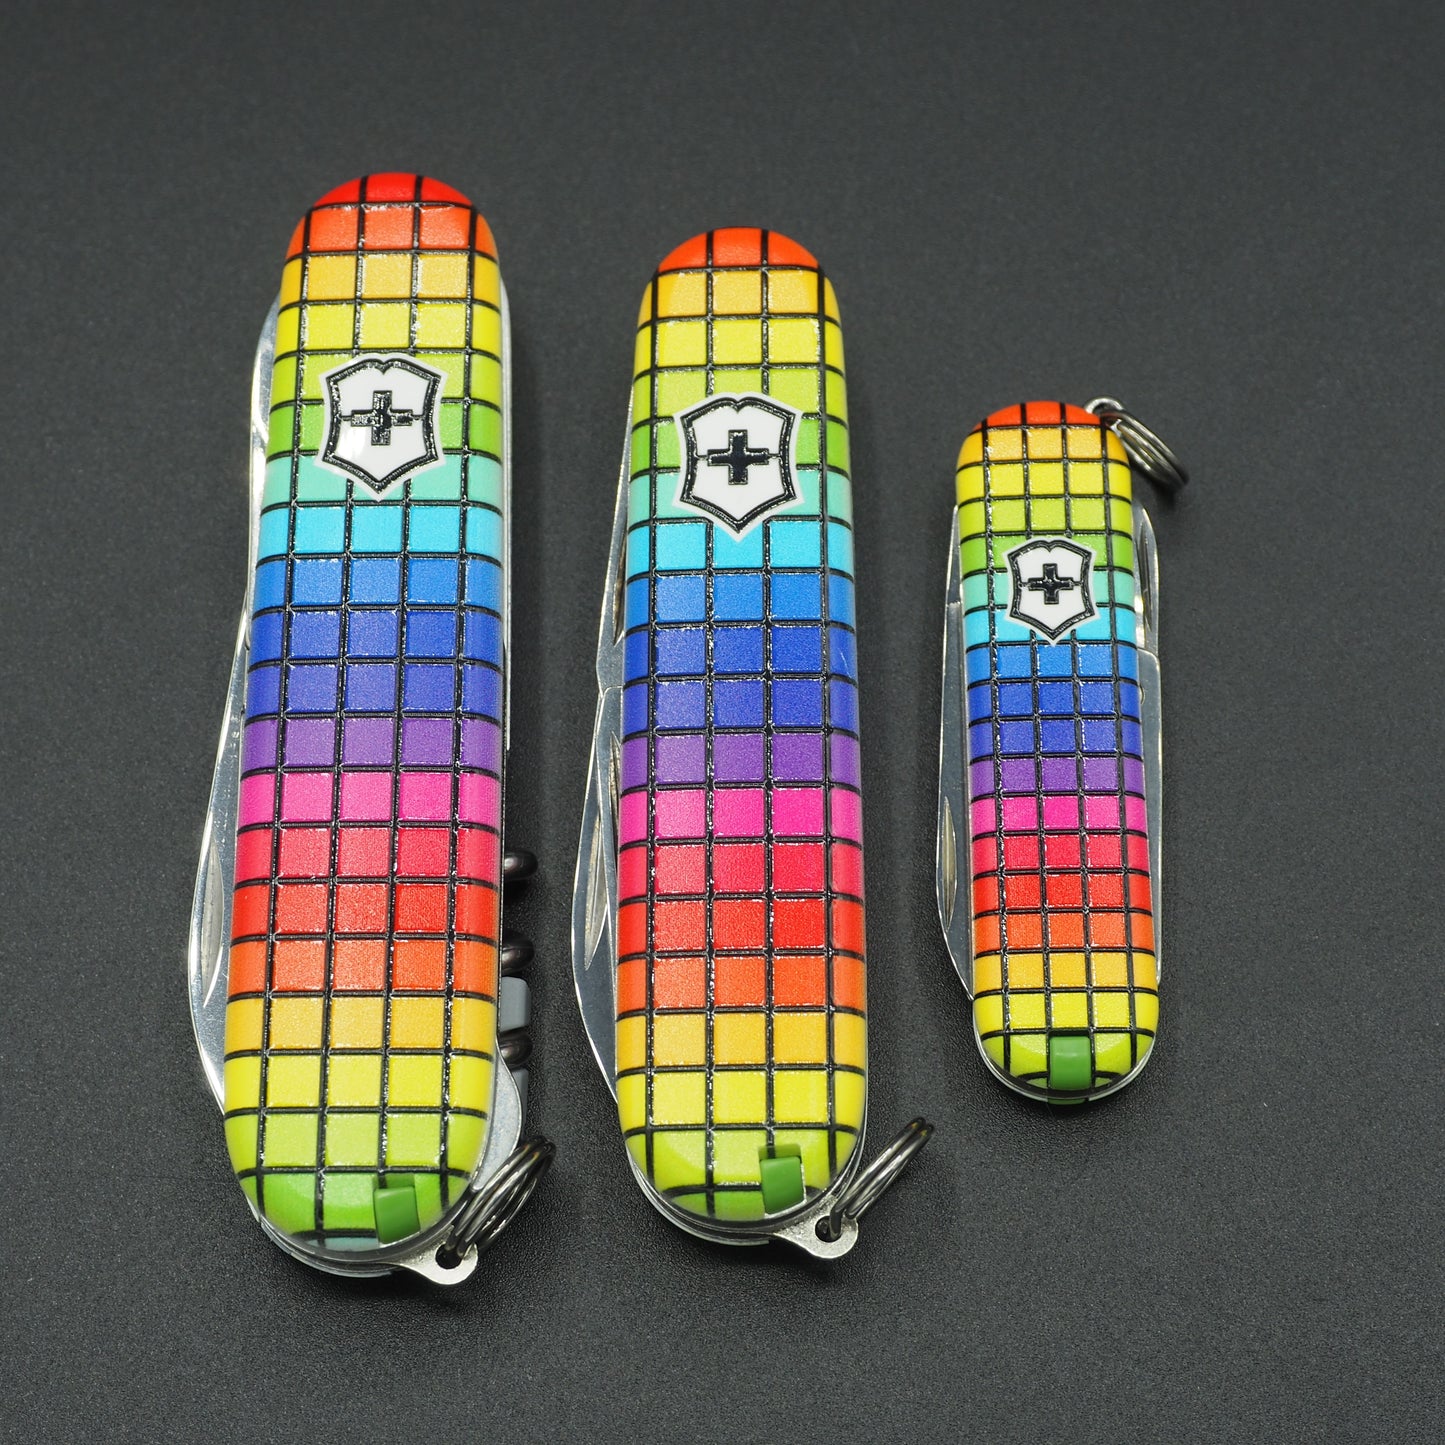 Victorinox Recruit 84mm "The Color" 3D The Sharp Knife Club Edition